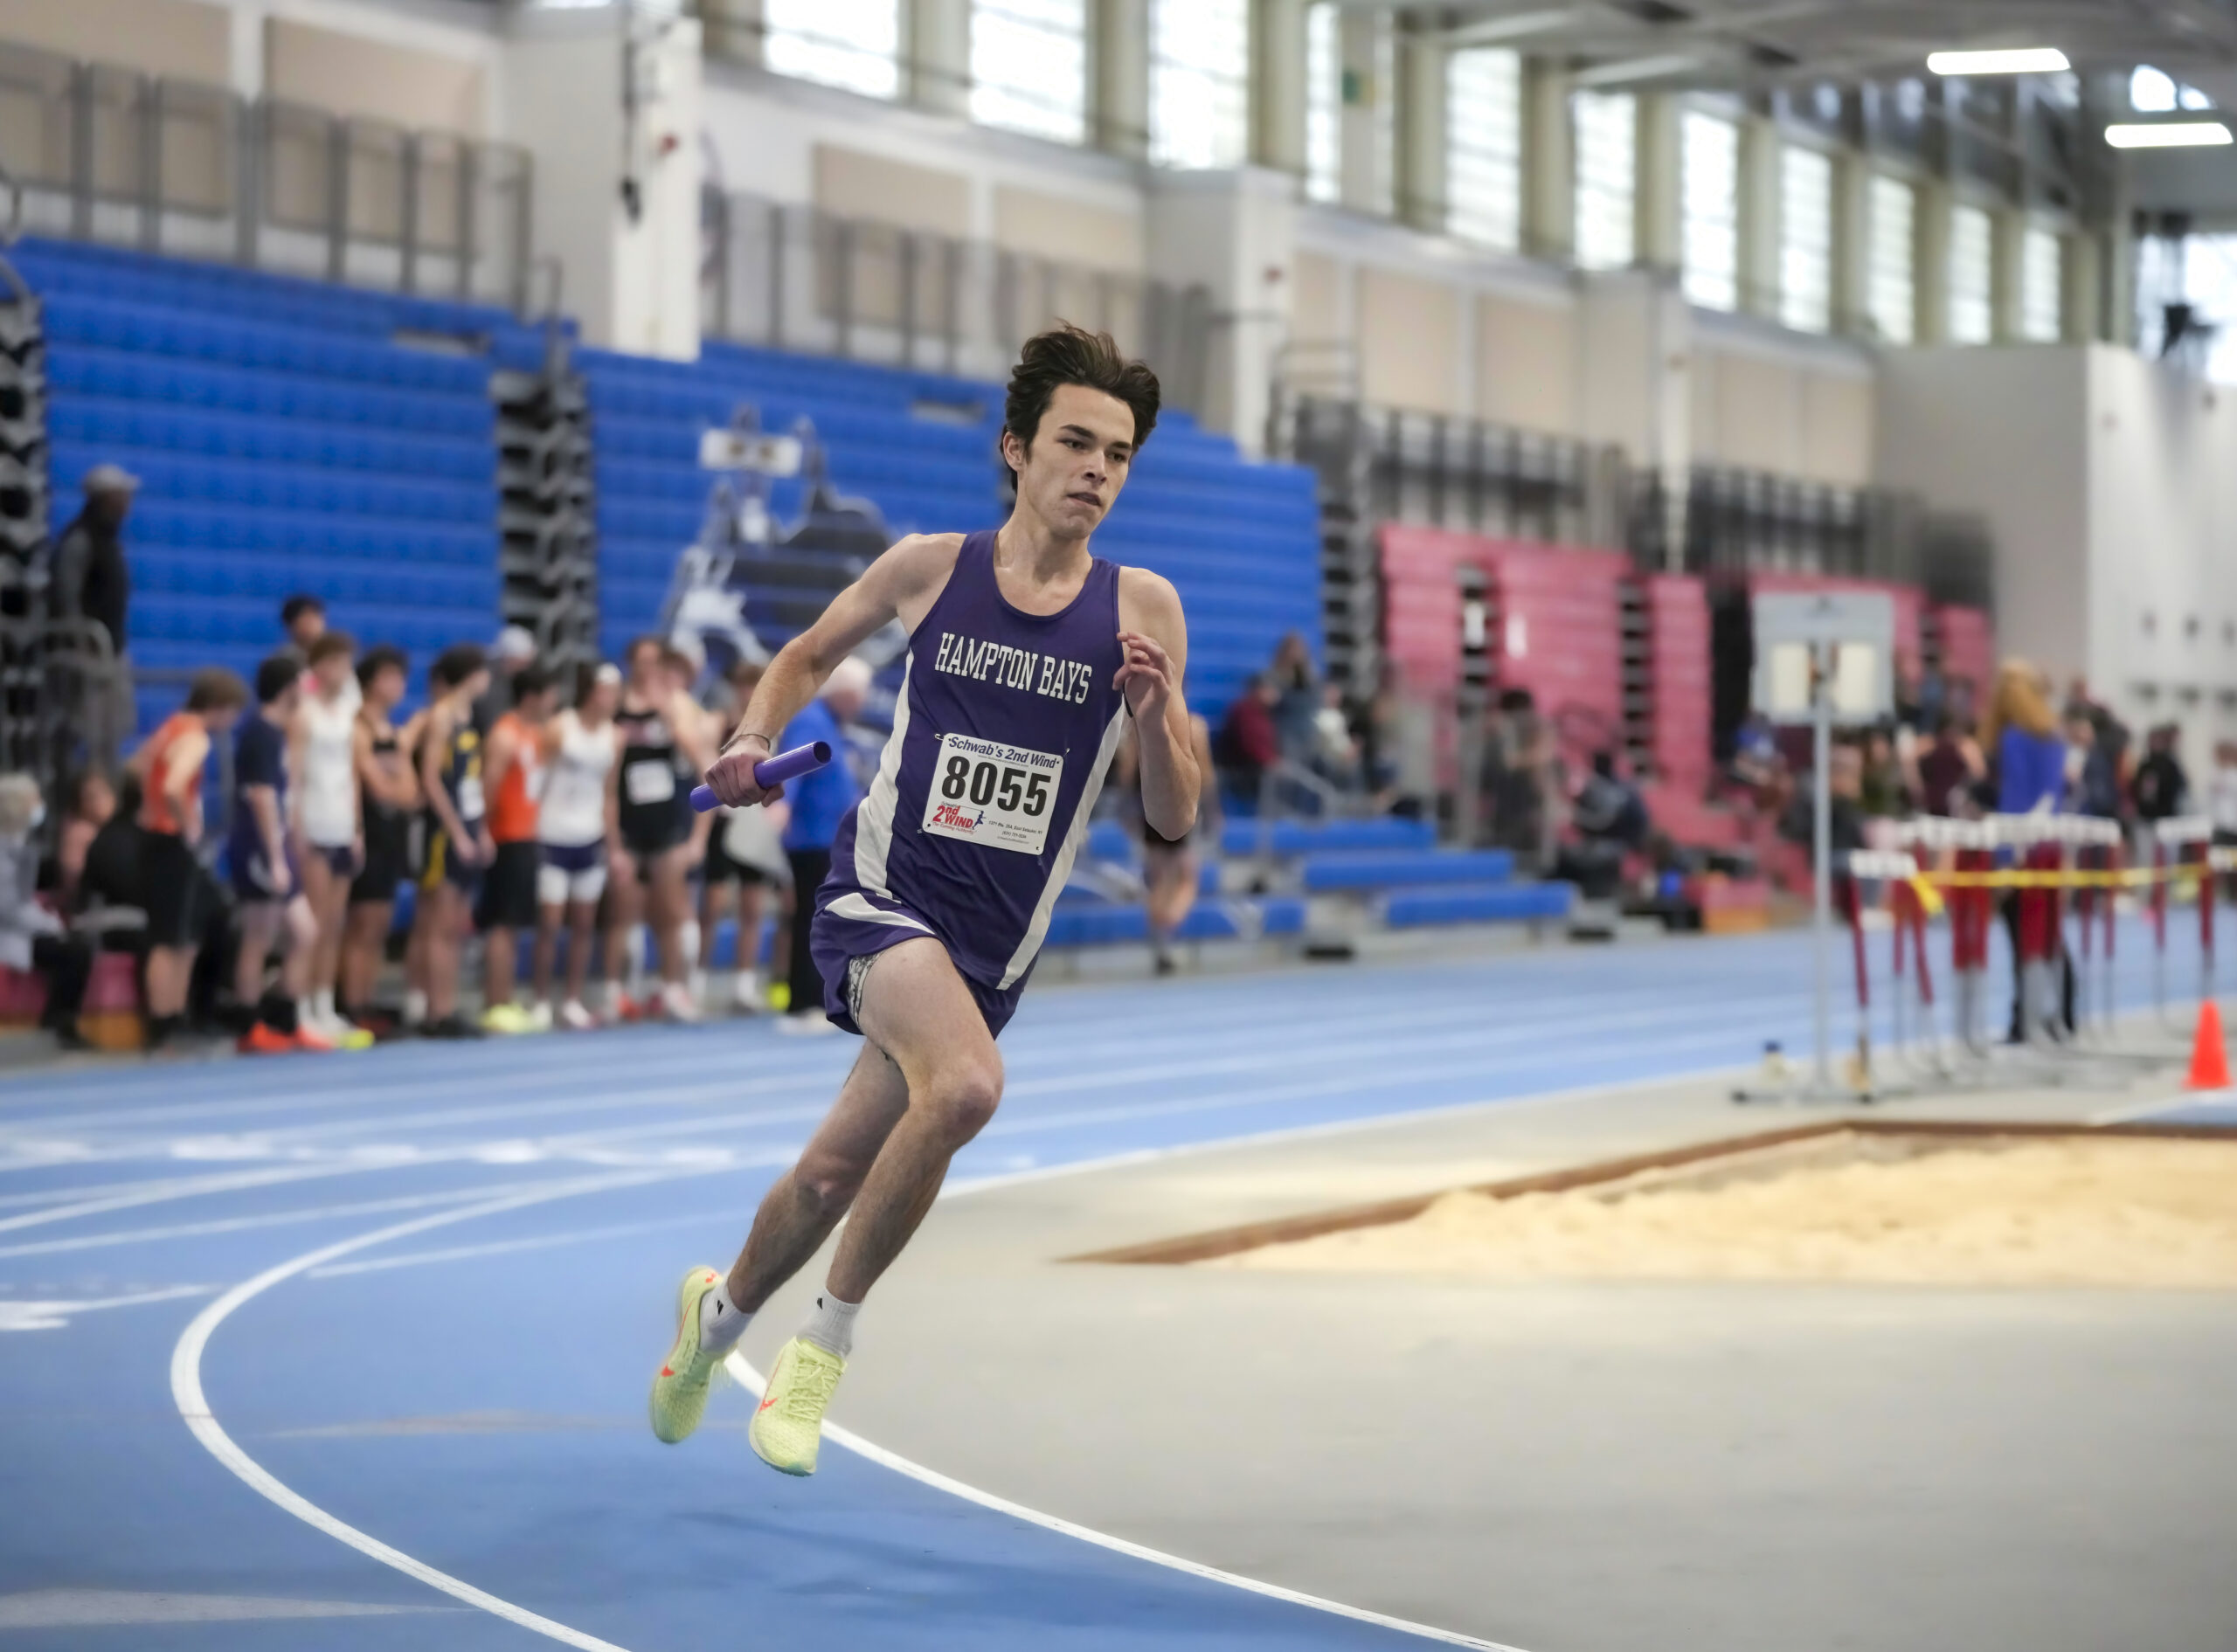 Liam Sutton of Hampton Bays competing in one of the relays.  RON ESPOSITO